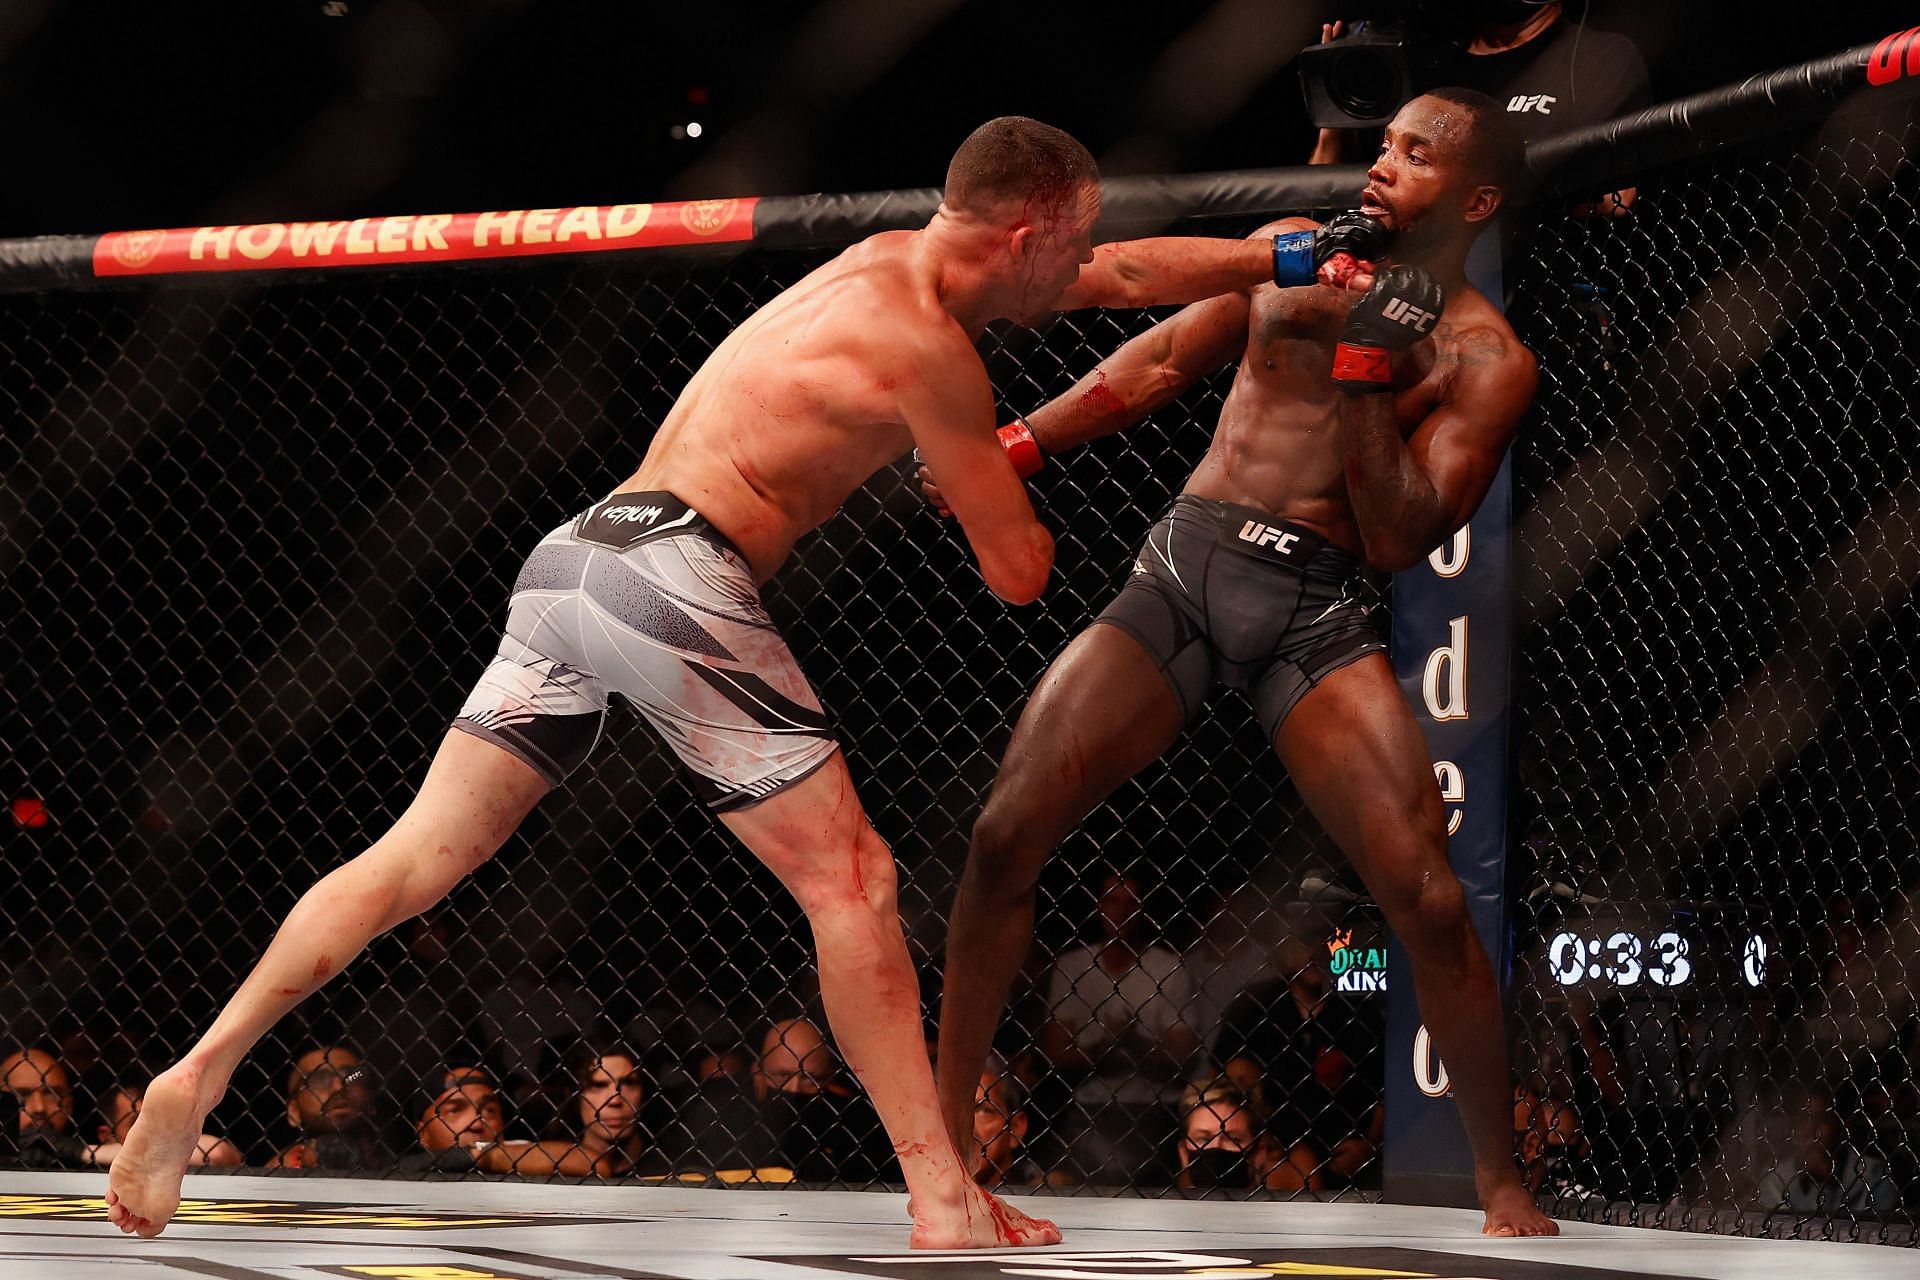 Nate Diaz once again stole the spotlight when he fought Leon Edwards at UFC 263